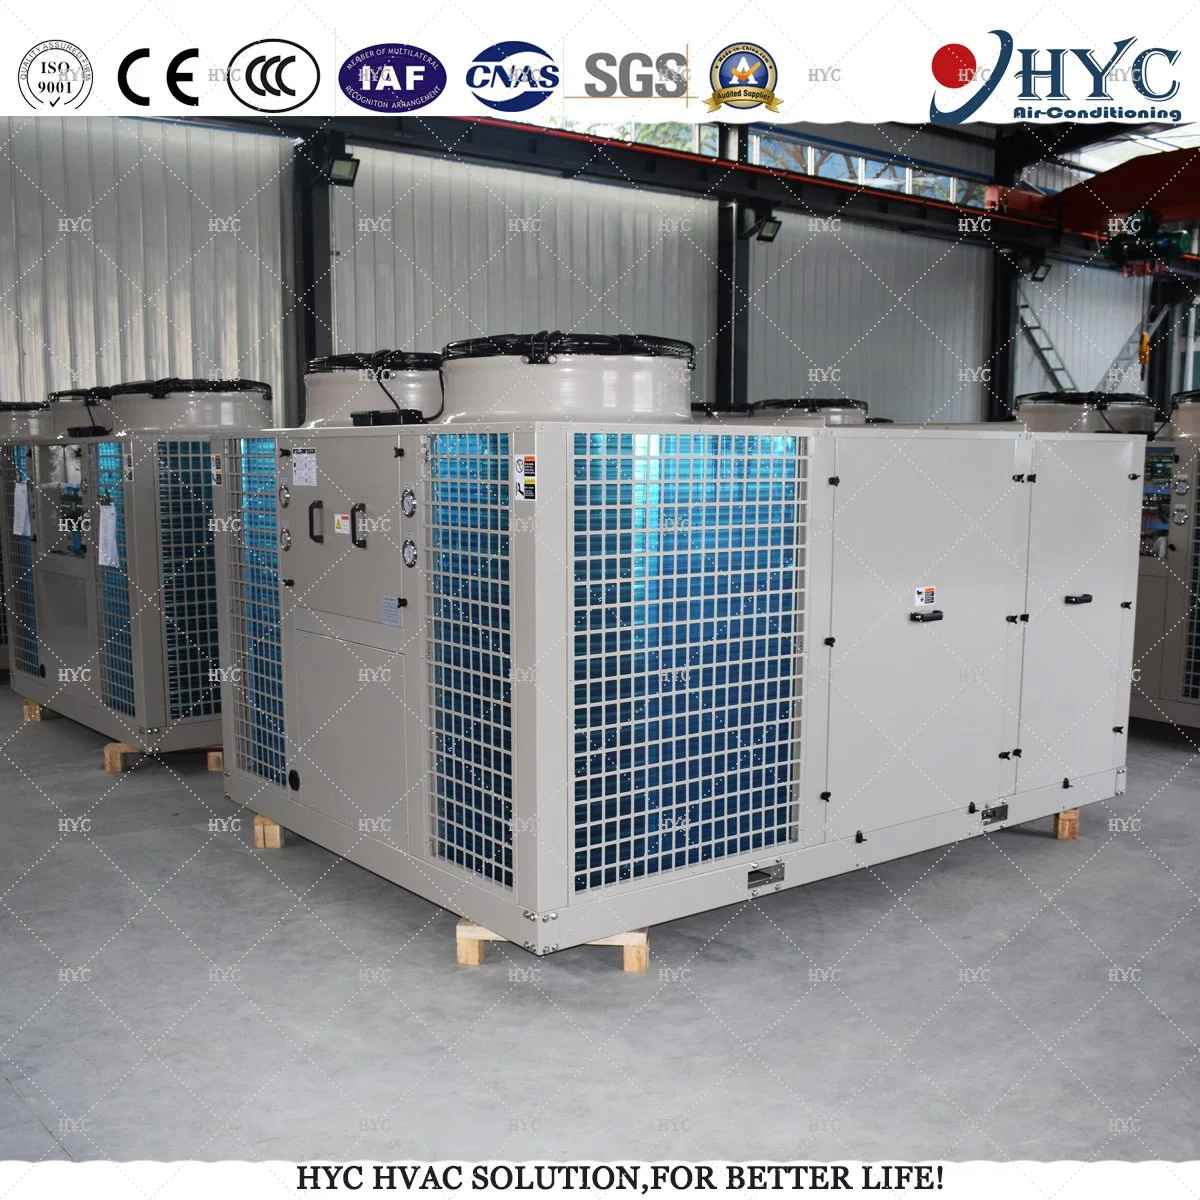 Rooftop Package Unit Air Conditioning System for Central AC